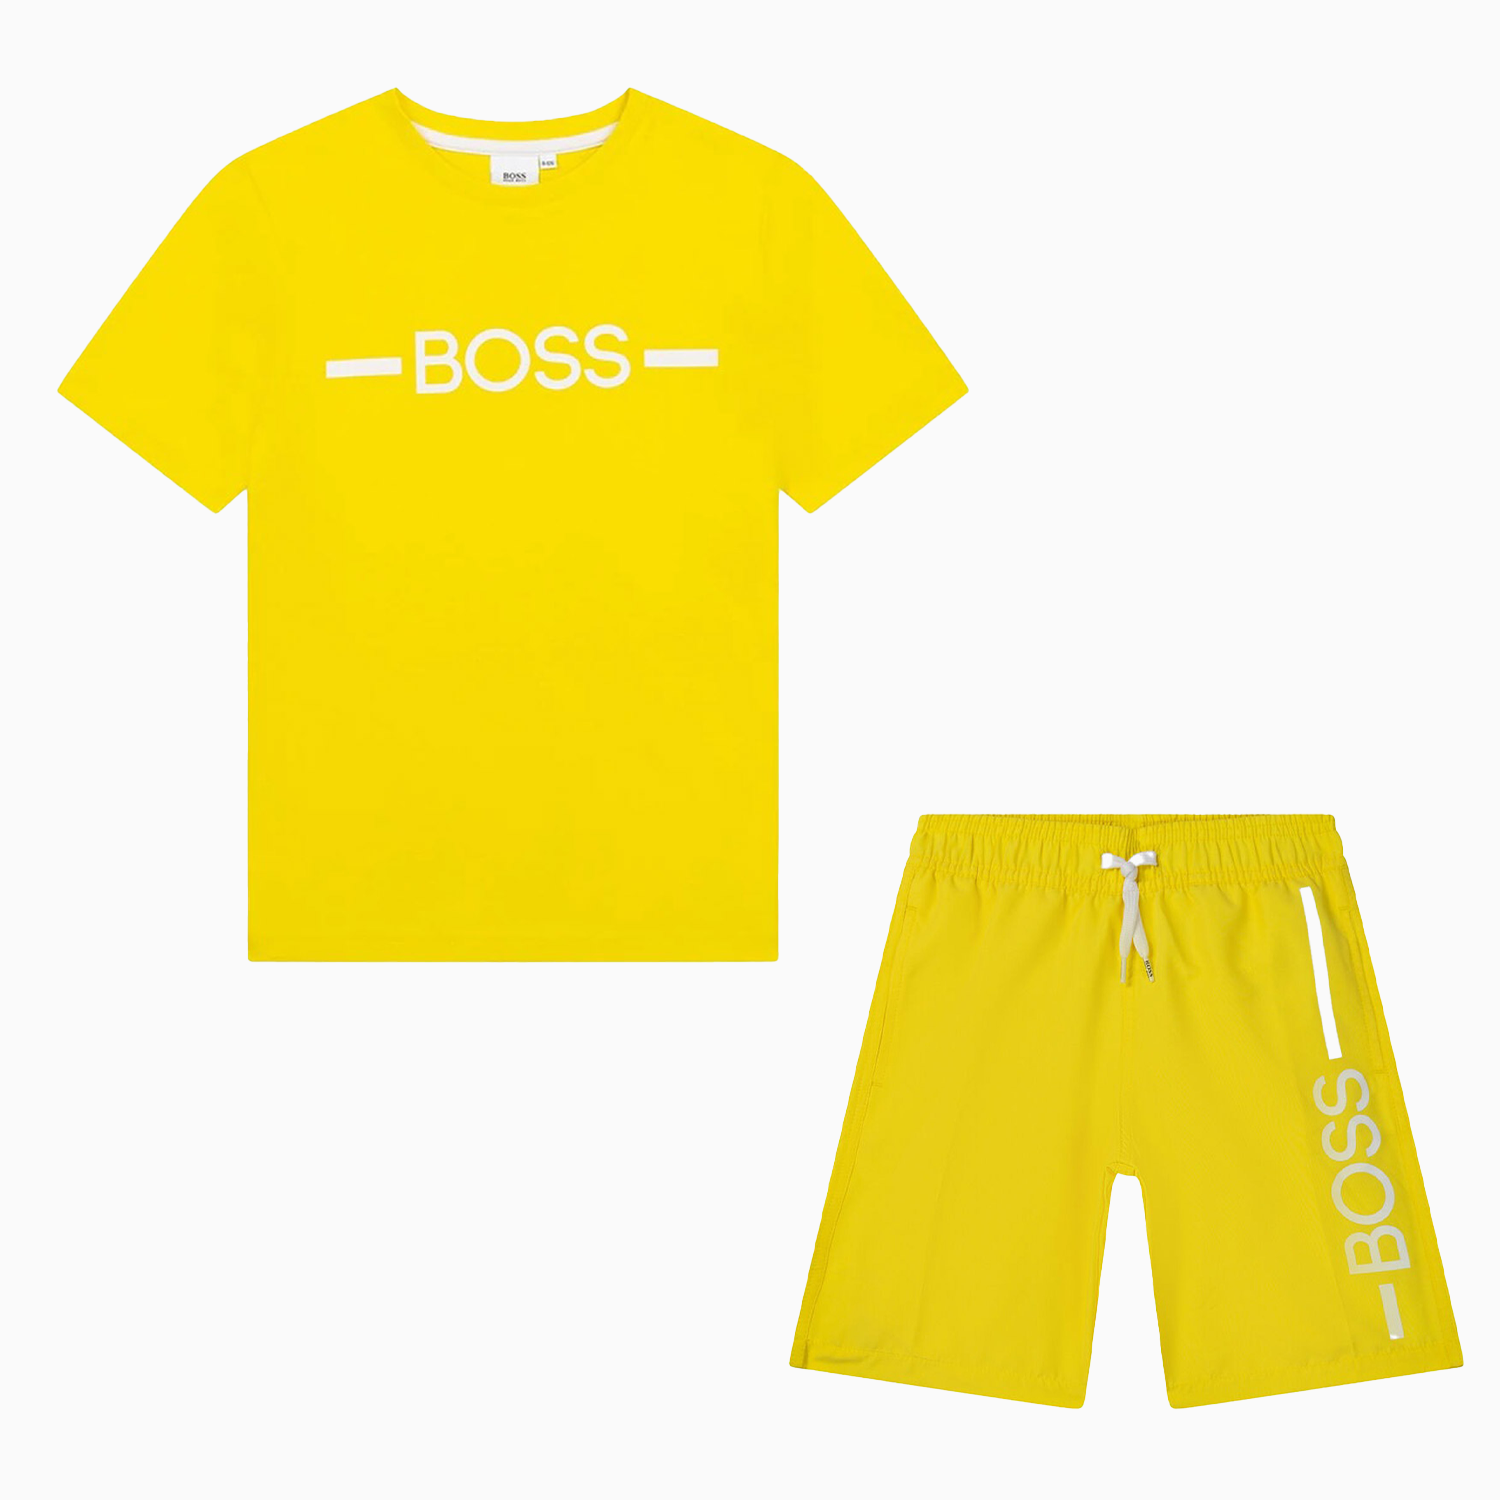 Hugo Boss Kid's Surfer Outfit - Color: Yellow - Kids Premium Clothing -